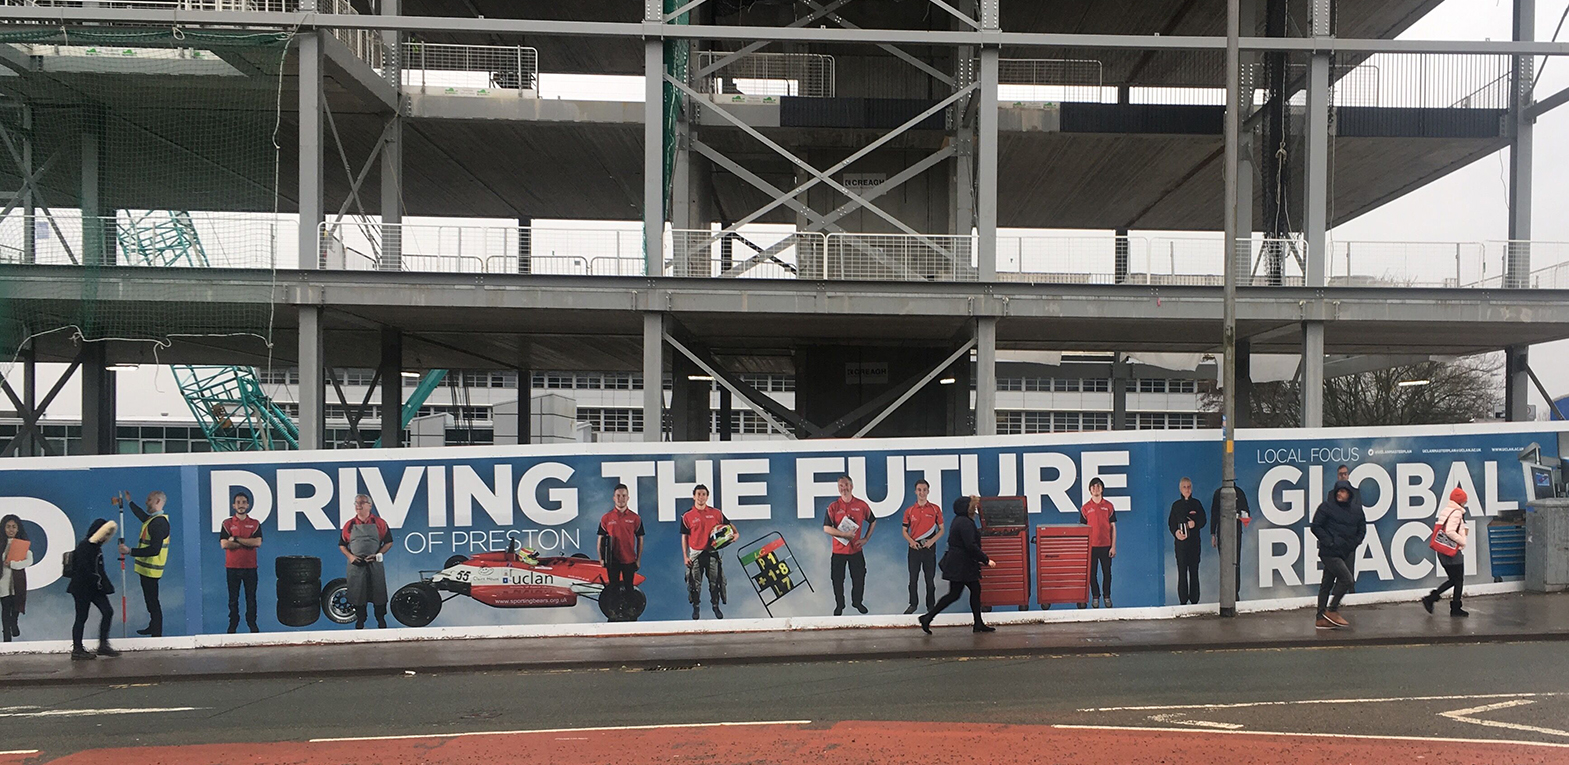 The People’s Hoardings Engineering Innovation Centre